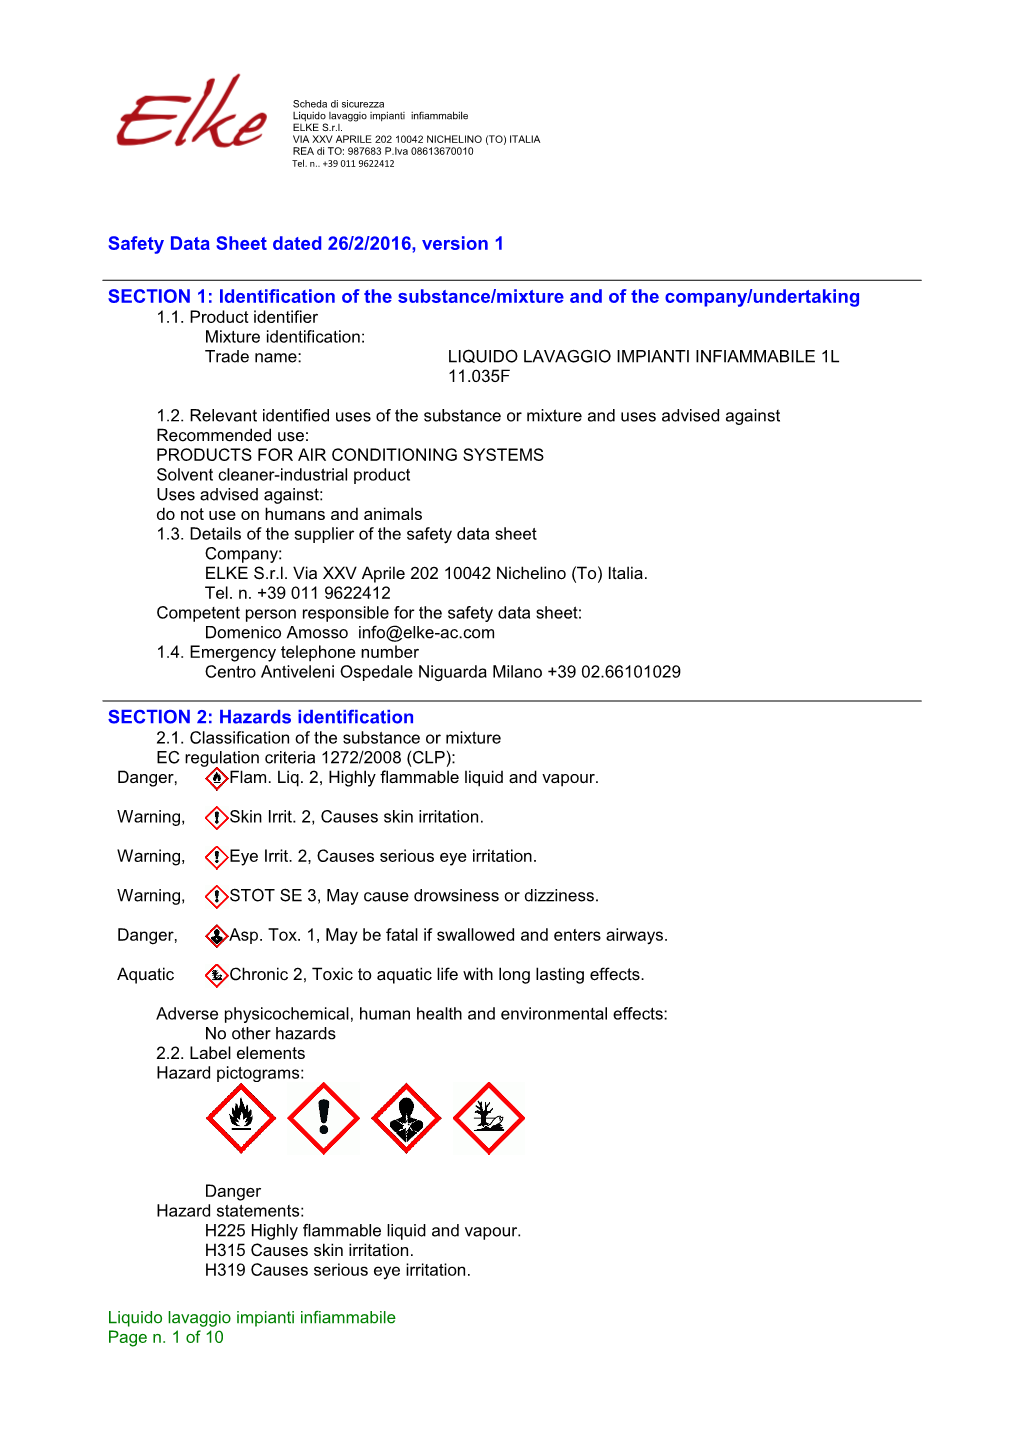 Safety Data Sheet Dated 26/2/2016, Version 1